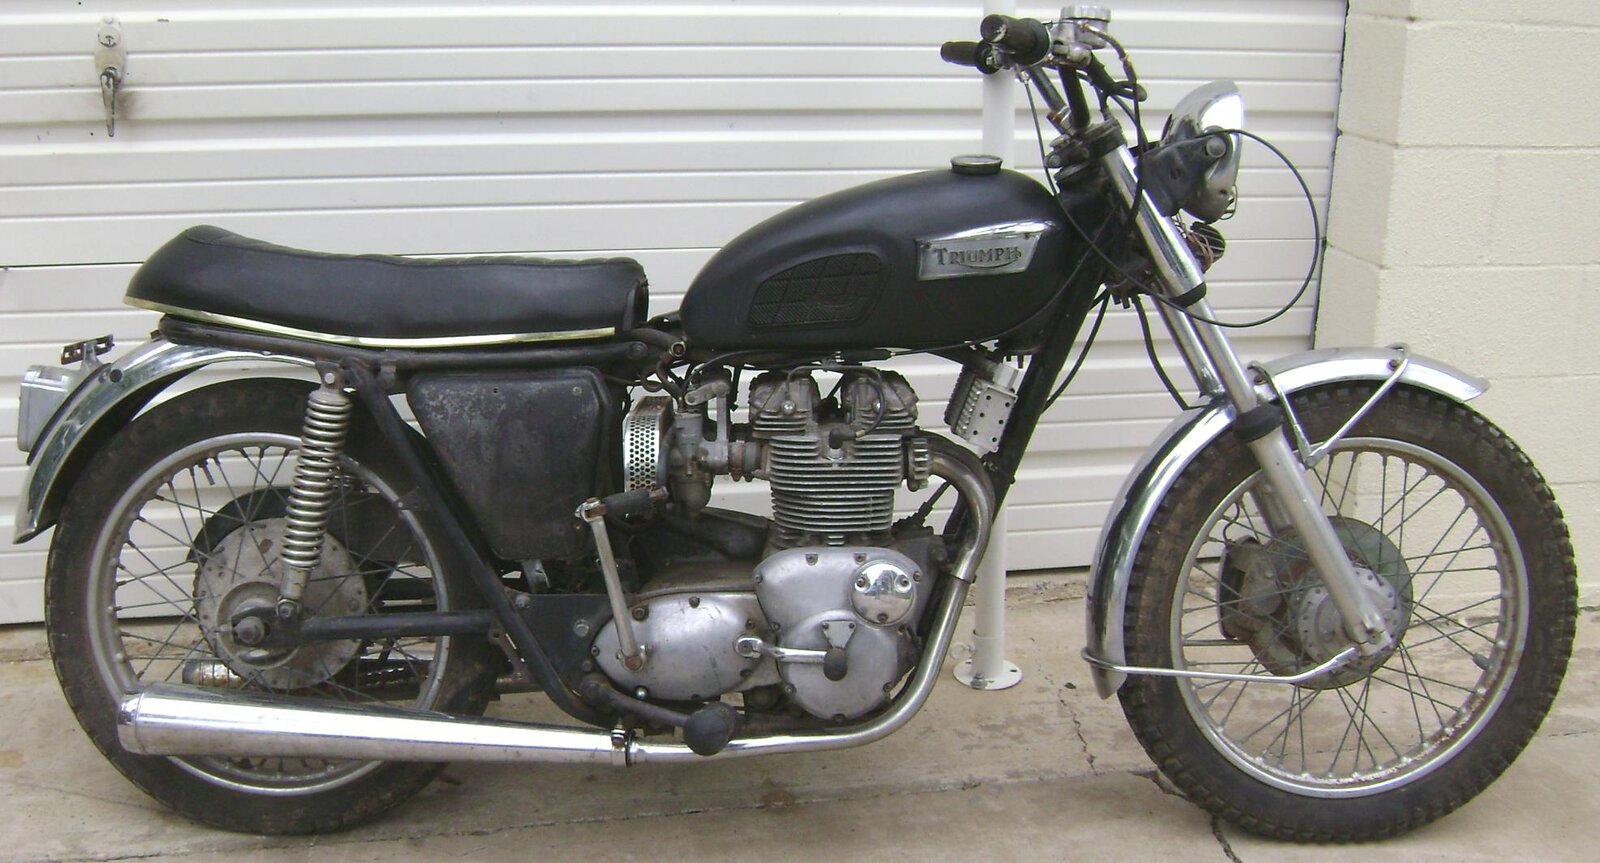 Pictures of your Triumph T160 or similar .